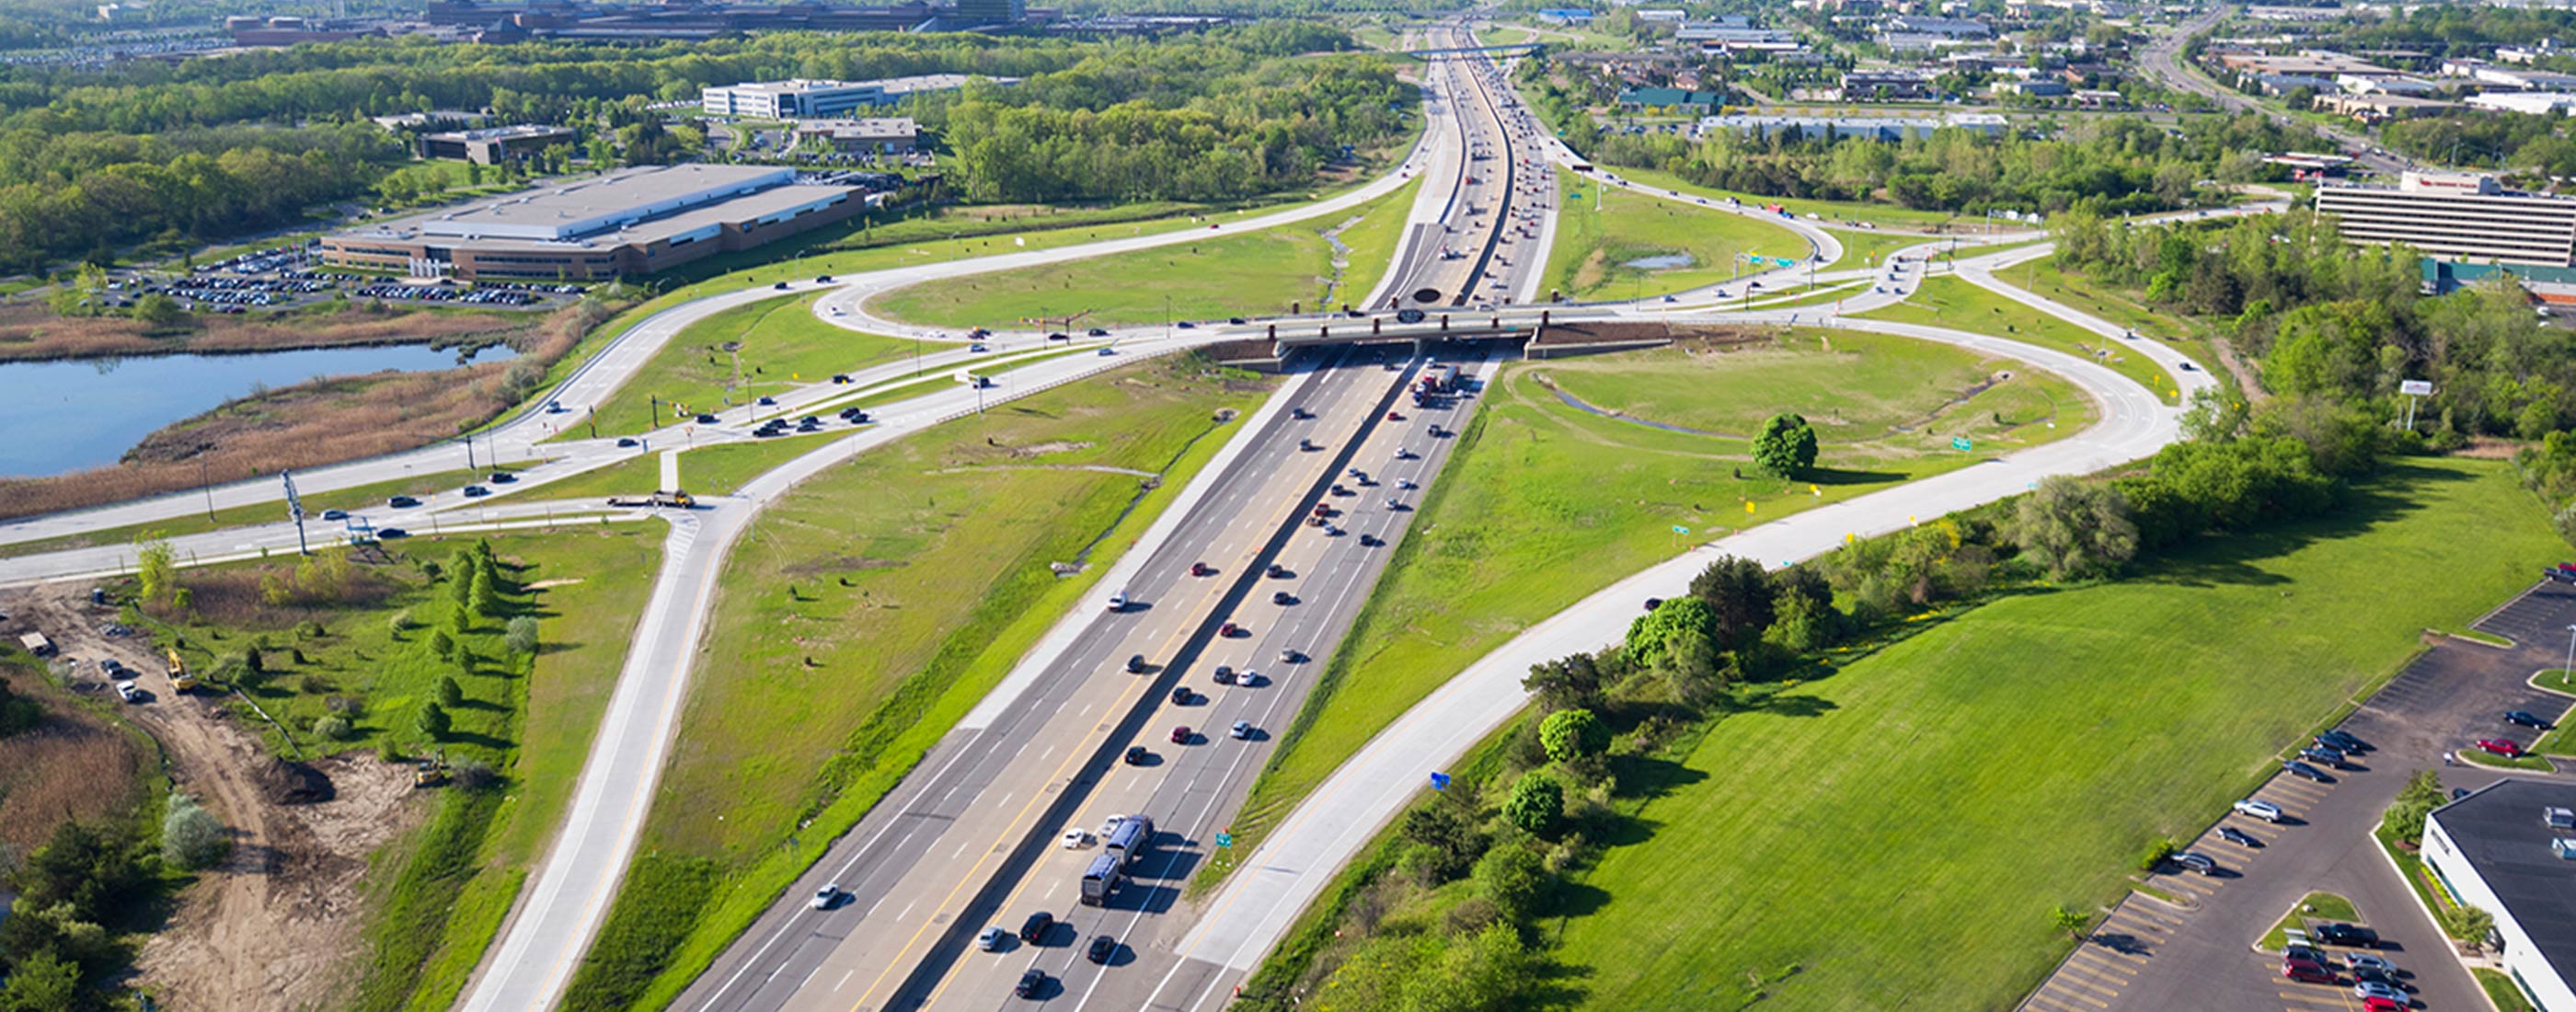 The Diverging Diamond Interchange located at Auburn Hills, MI’s I-75 and University Drive improves traffic flow and safety.